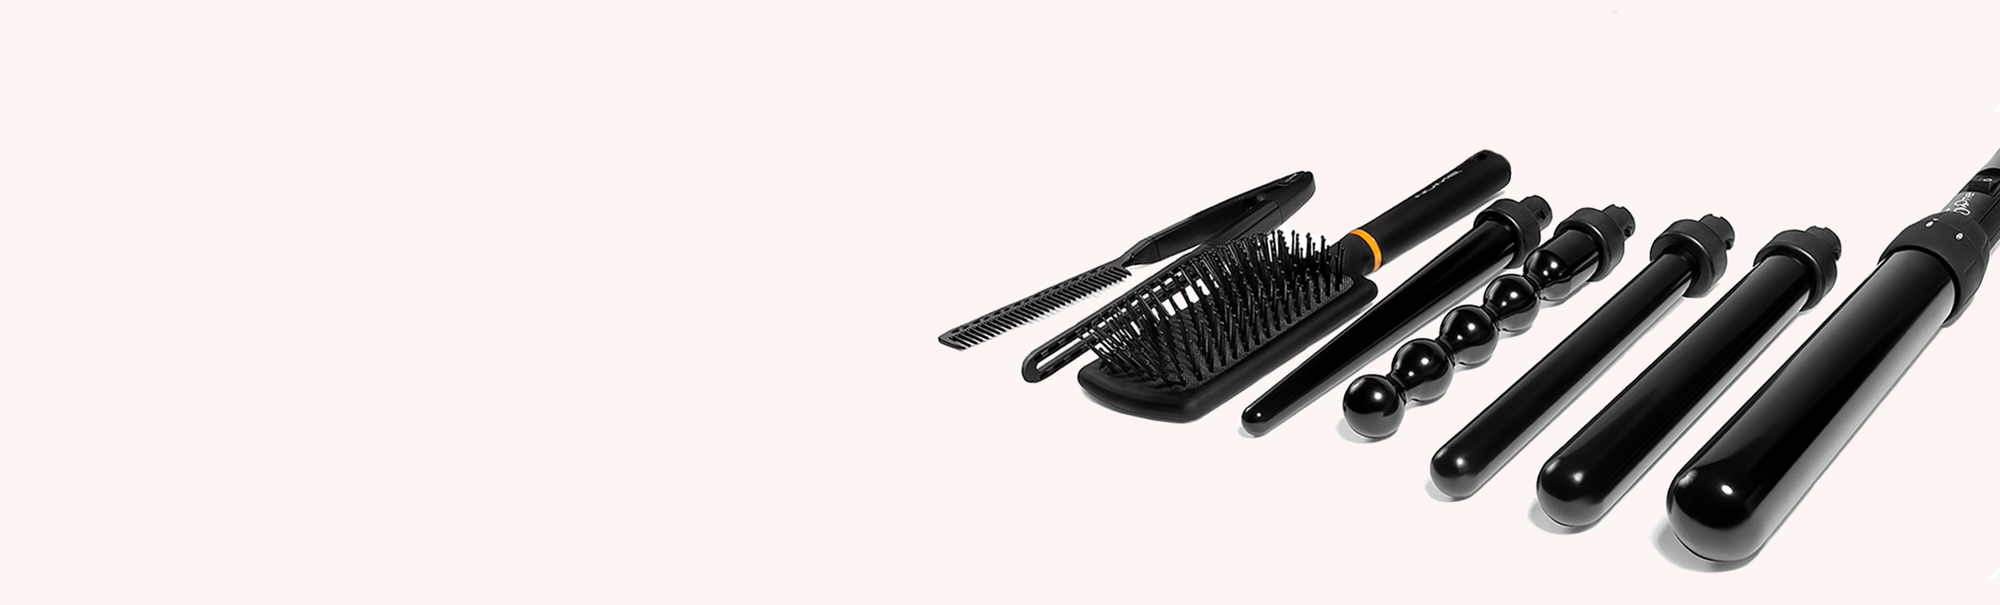 Hair Styling Sets